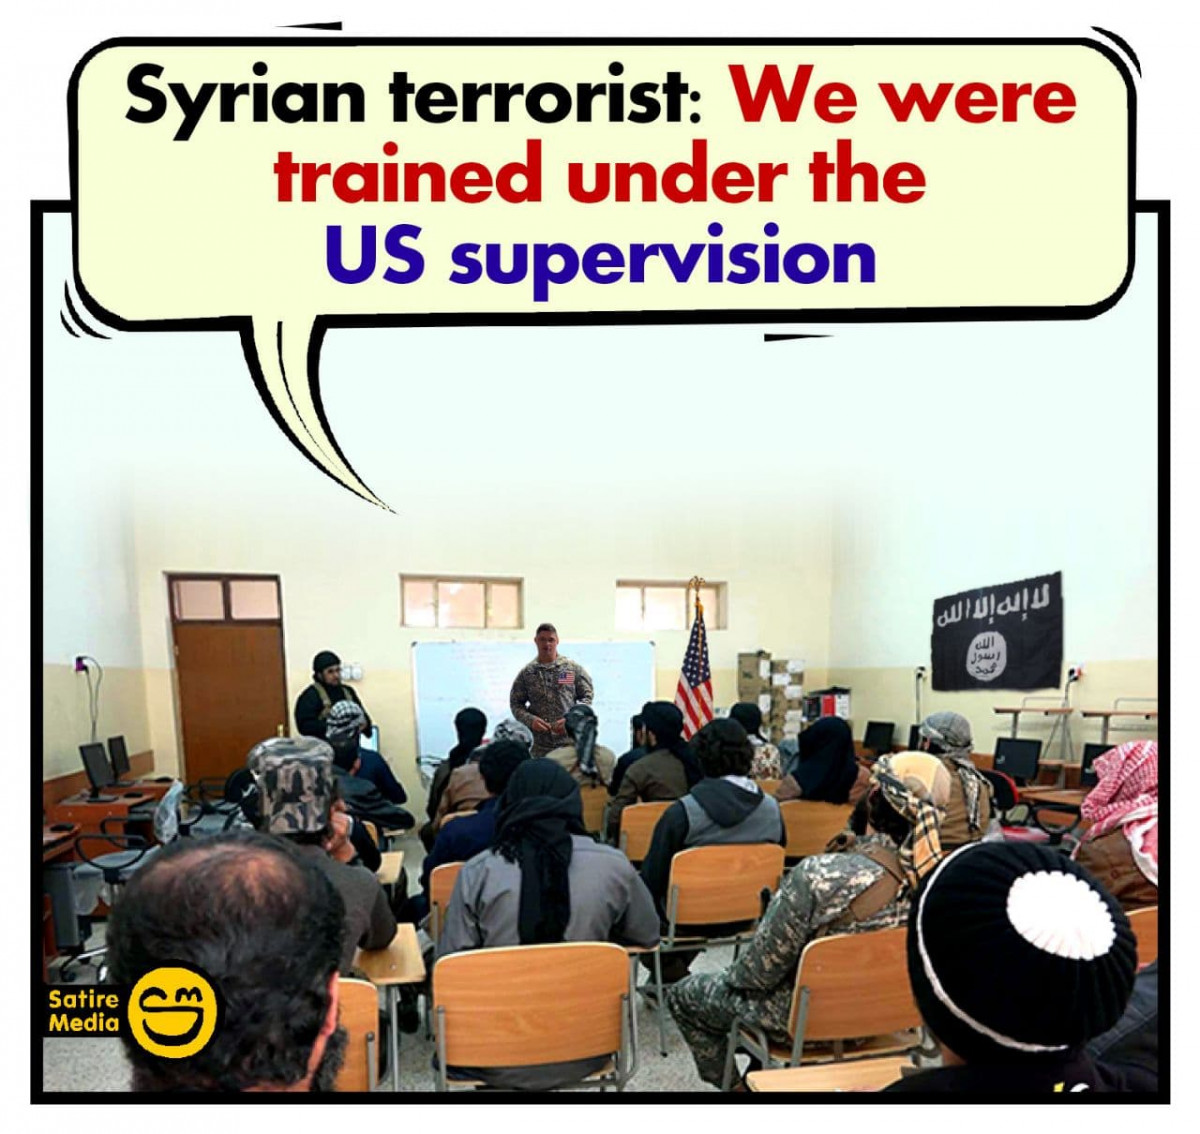 Syrian terrorist: We were trained under the US supervision